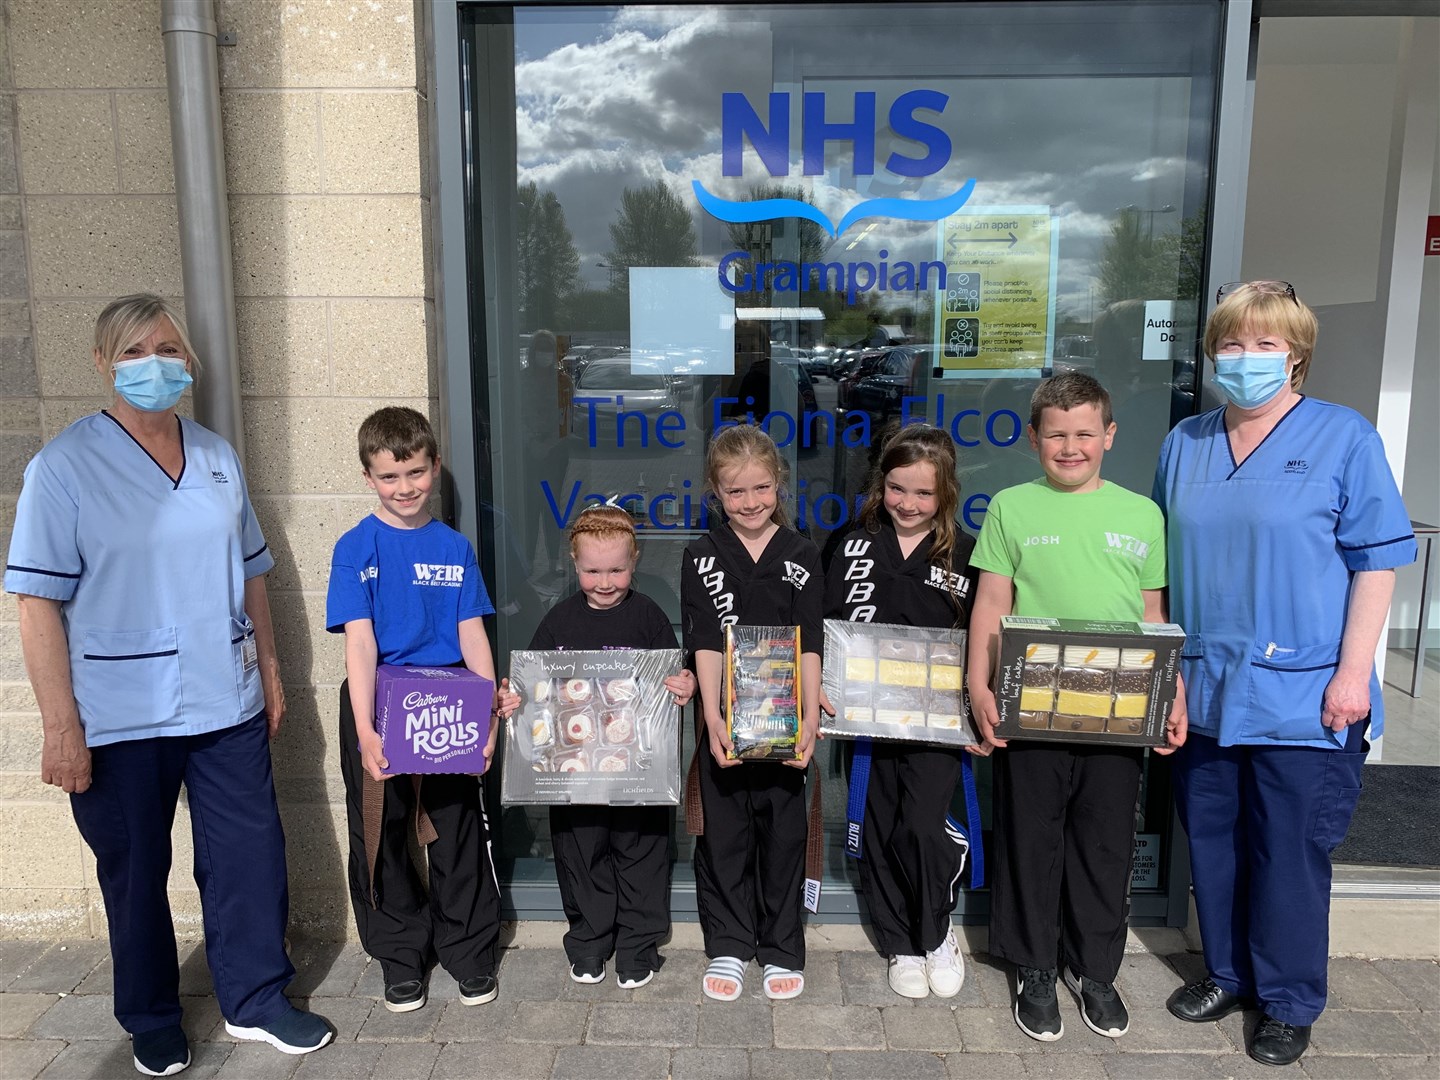 Children from Weir's Black Belt Academy in Elgin thanked nurses at the Fiona Elcock Vaccination Centre in Elgin for their hard work during the vaccine rollout.